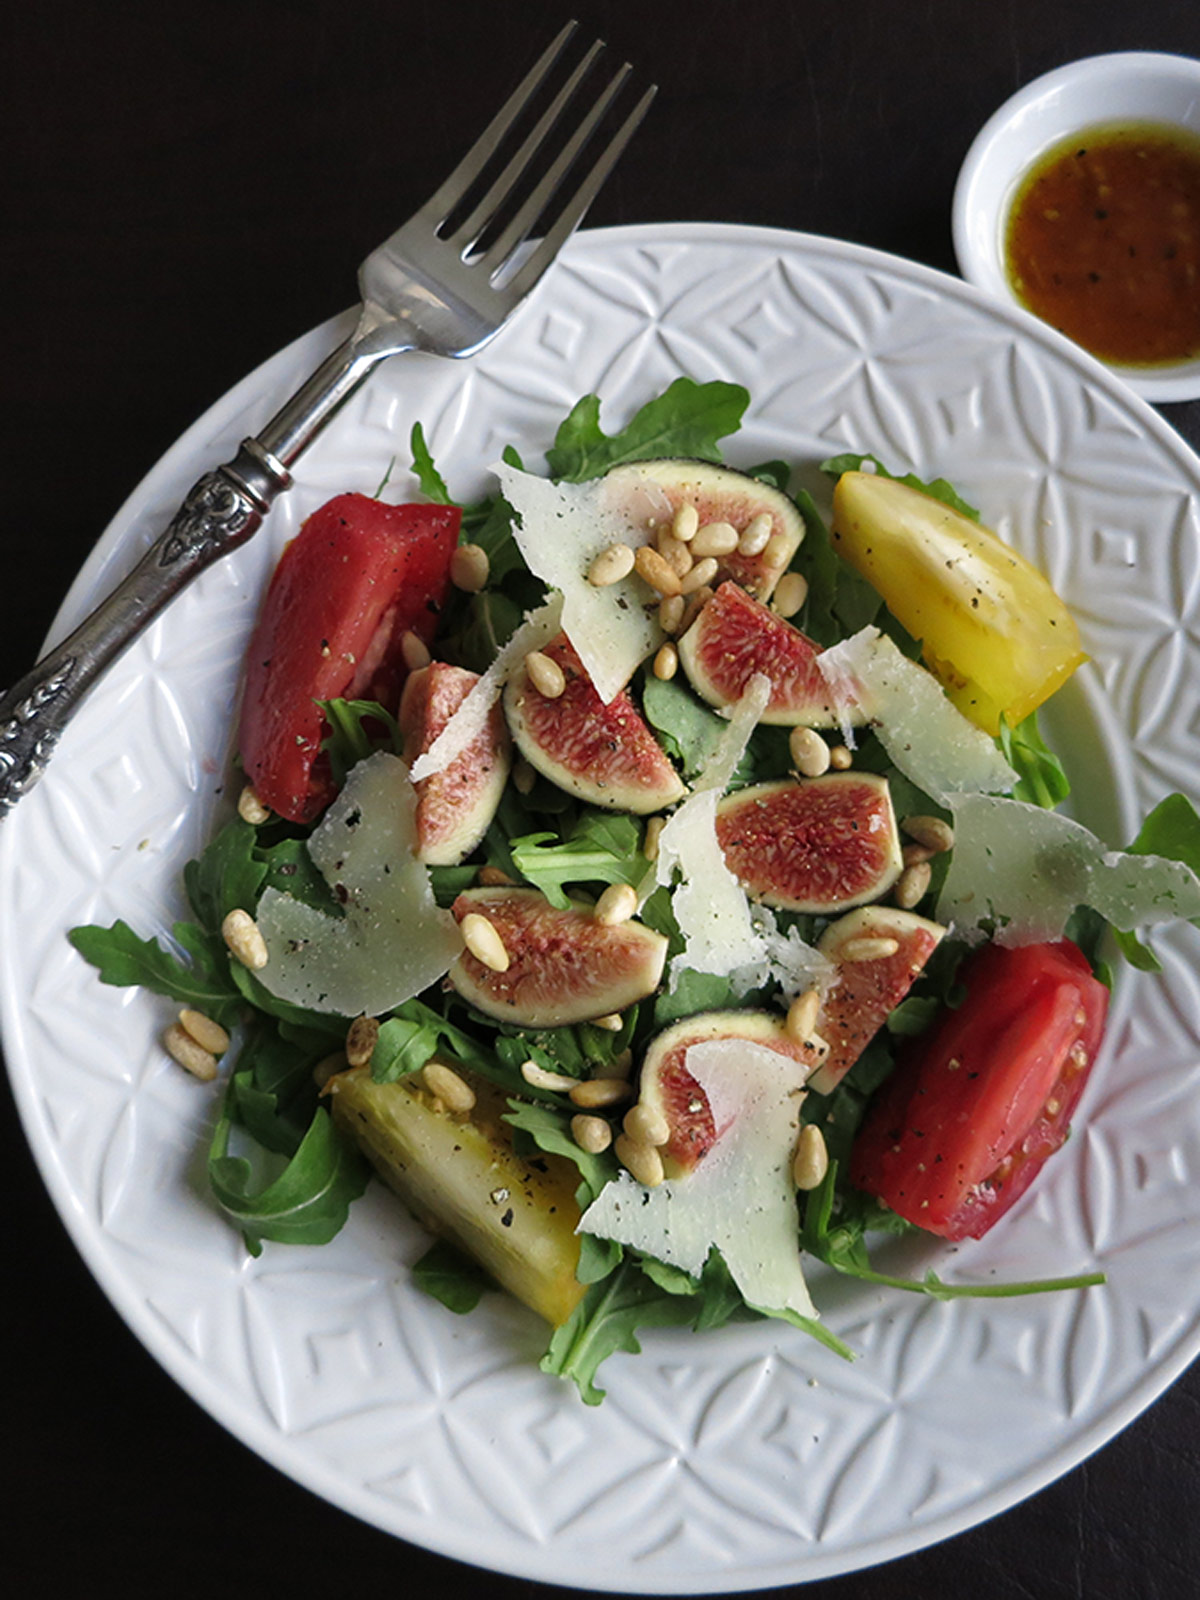 Fig salad with pomegranate molasses dressing.